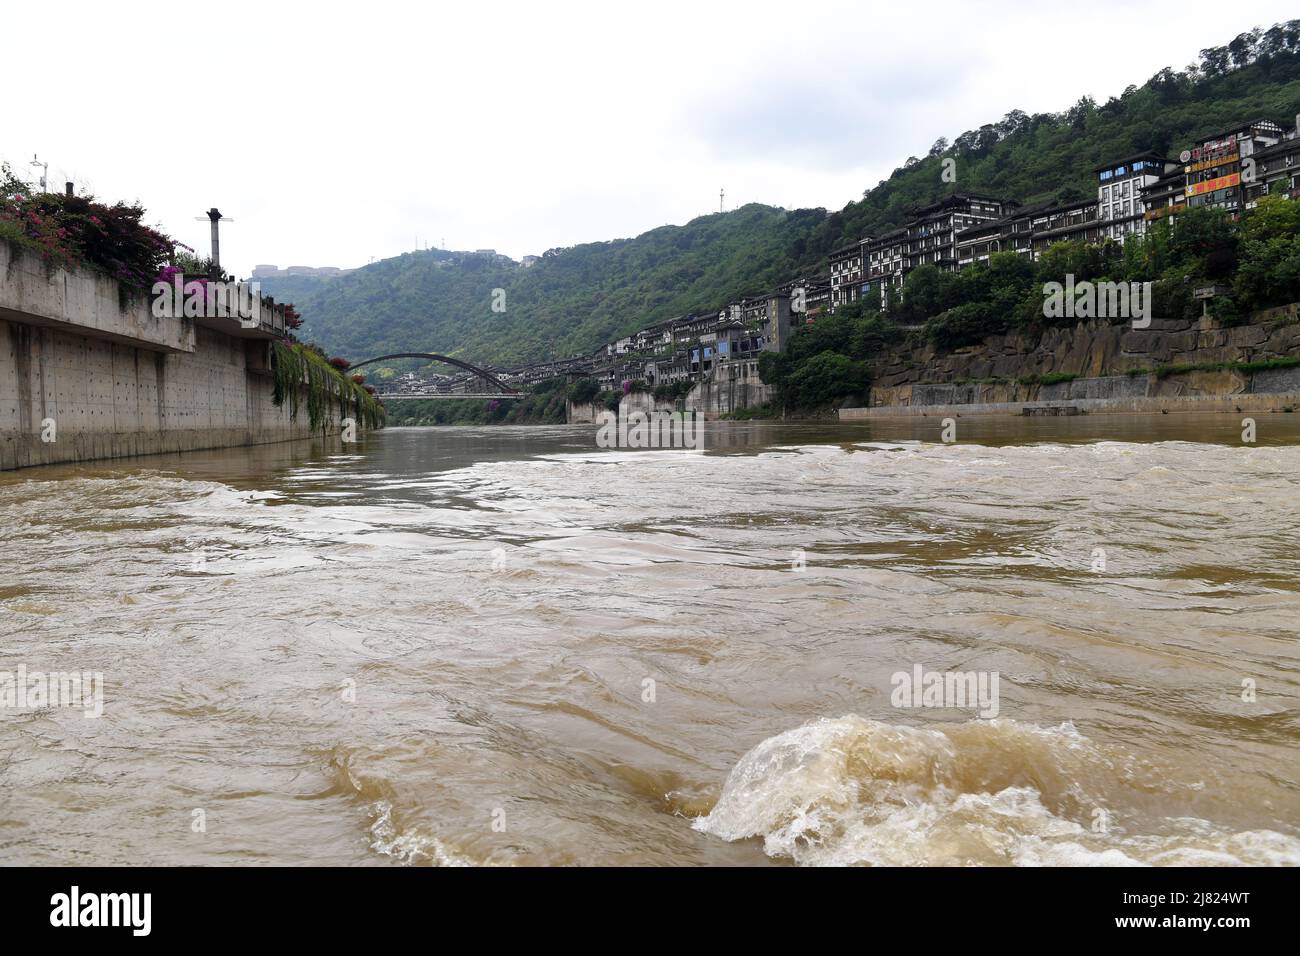 RENHUAI, CHINA - MAY 12, 2022 - The Chishui River rises through Maotai town after a rainstorm on May 12, 2022 in Renhuai City, Guizhou Province, China Stock Photo